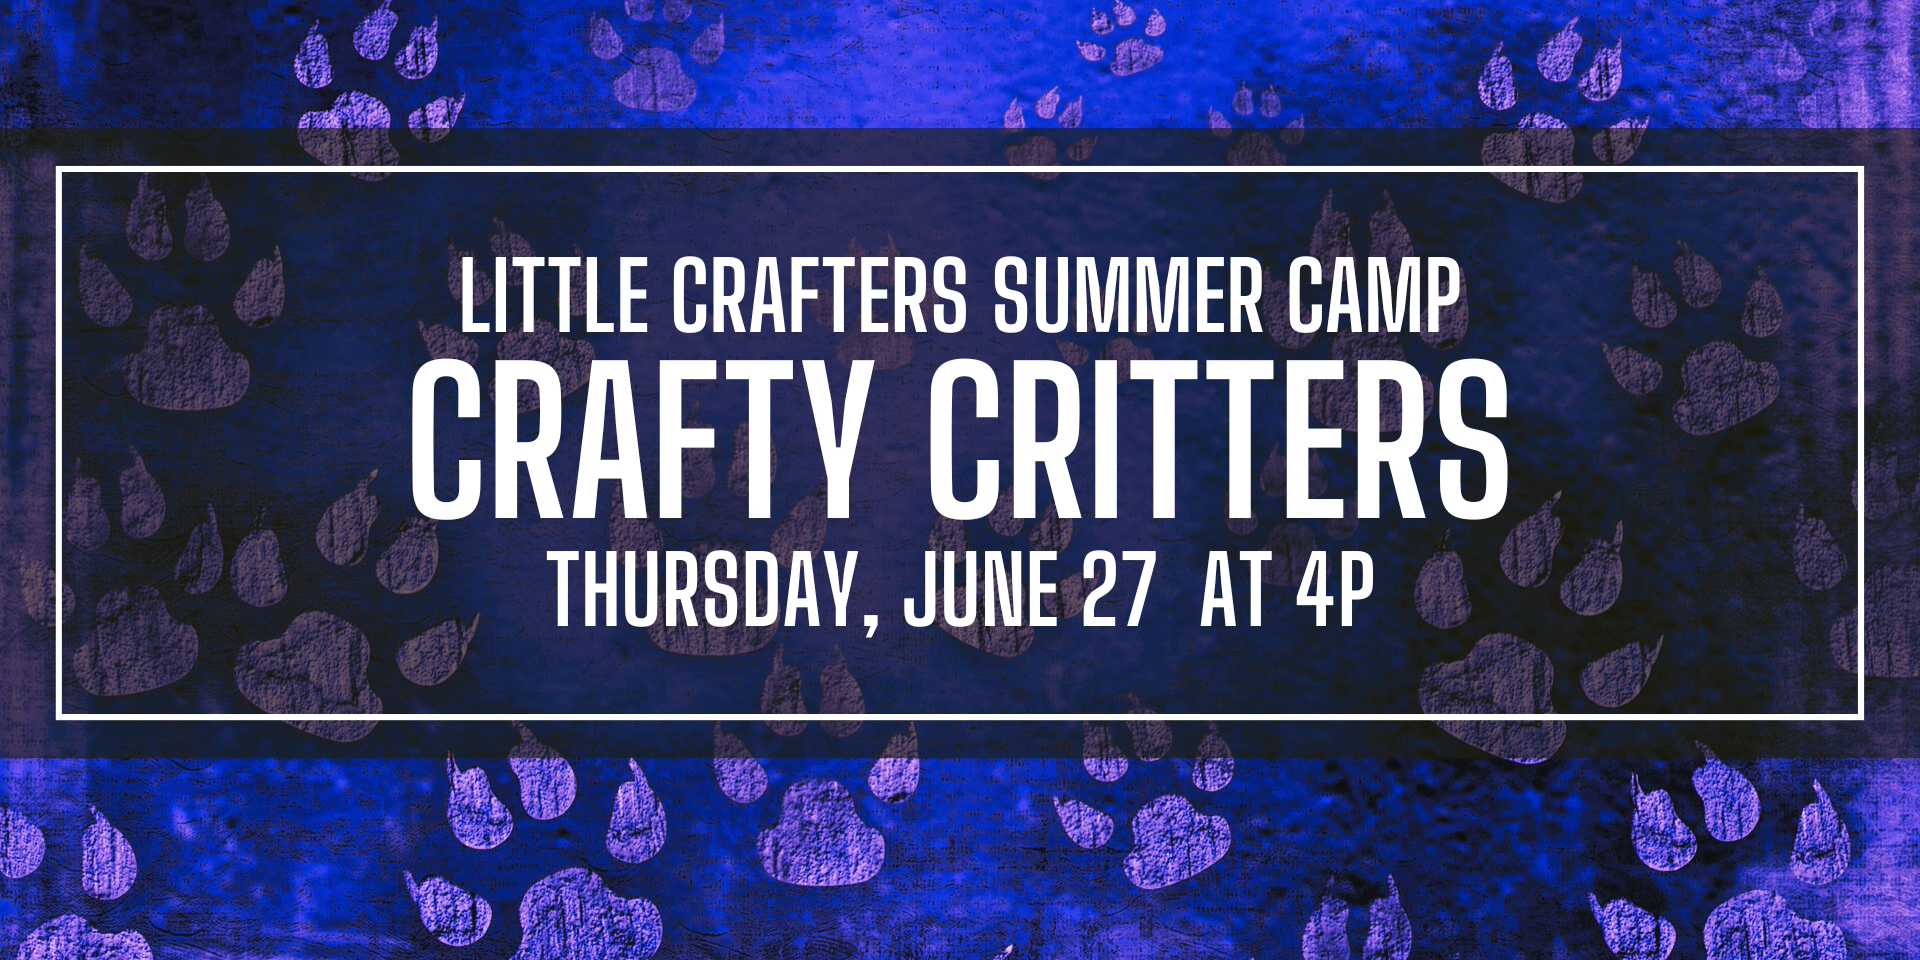 Little Crafters Summer Camp: Crafty Critters